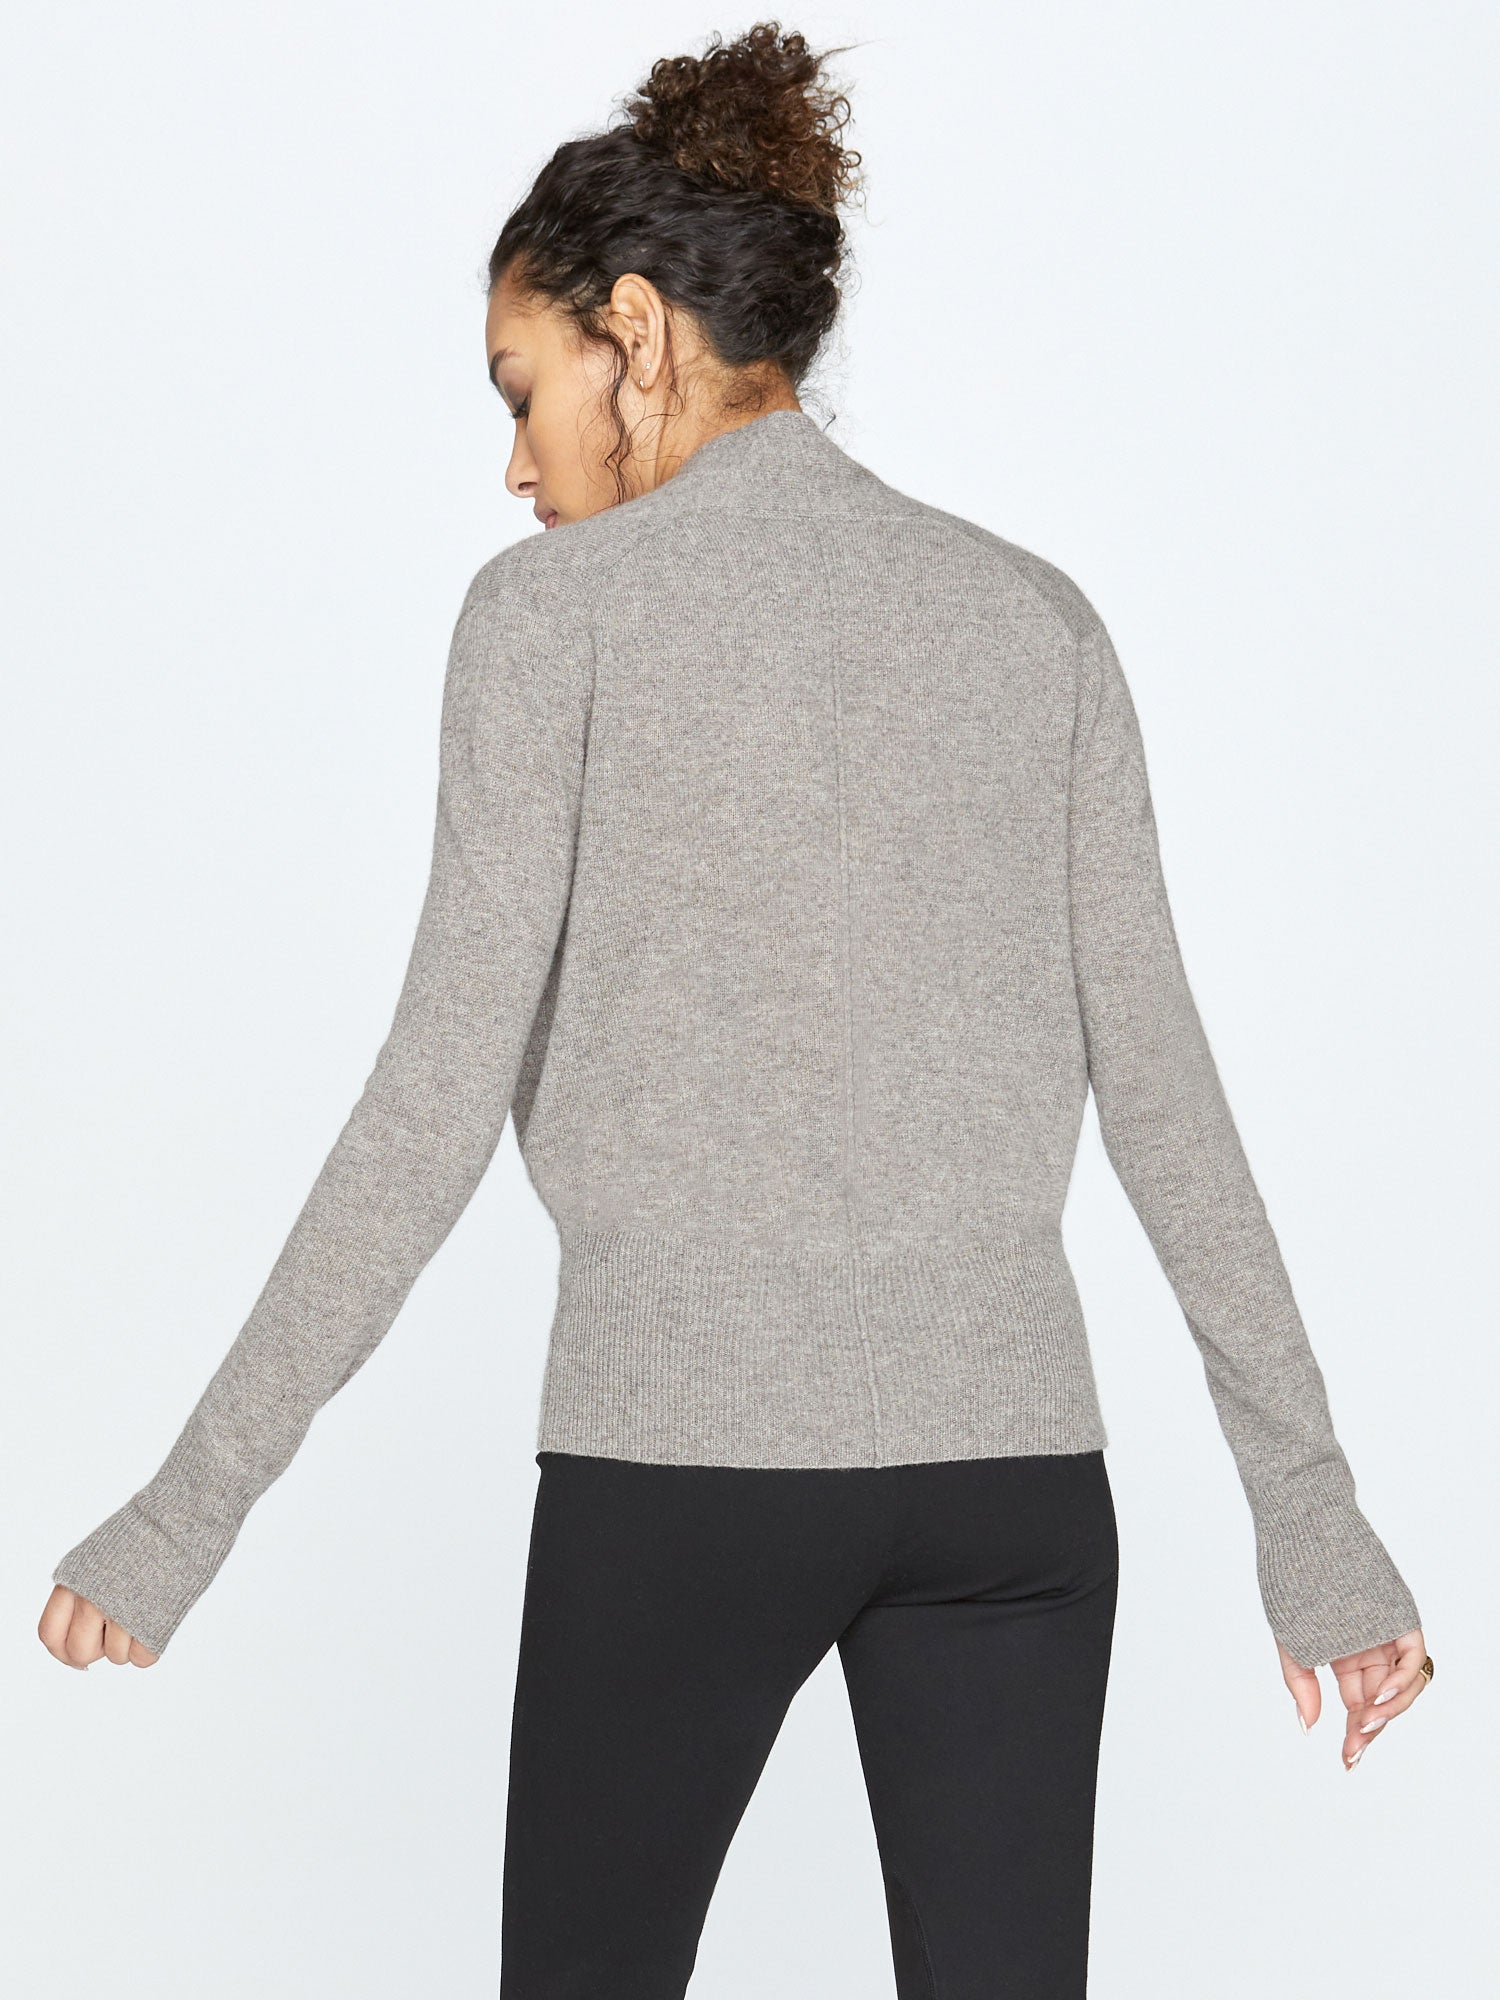 Phinneas cashmere v-neck blue grey sweater back view